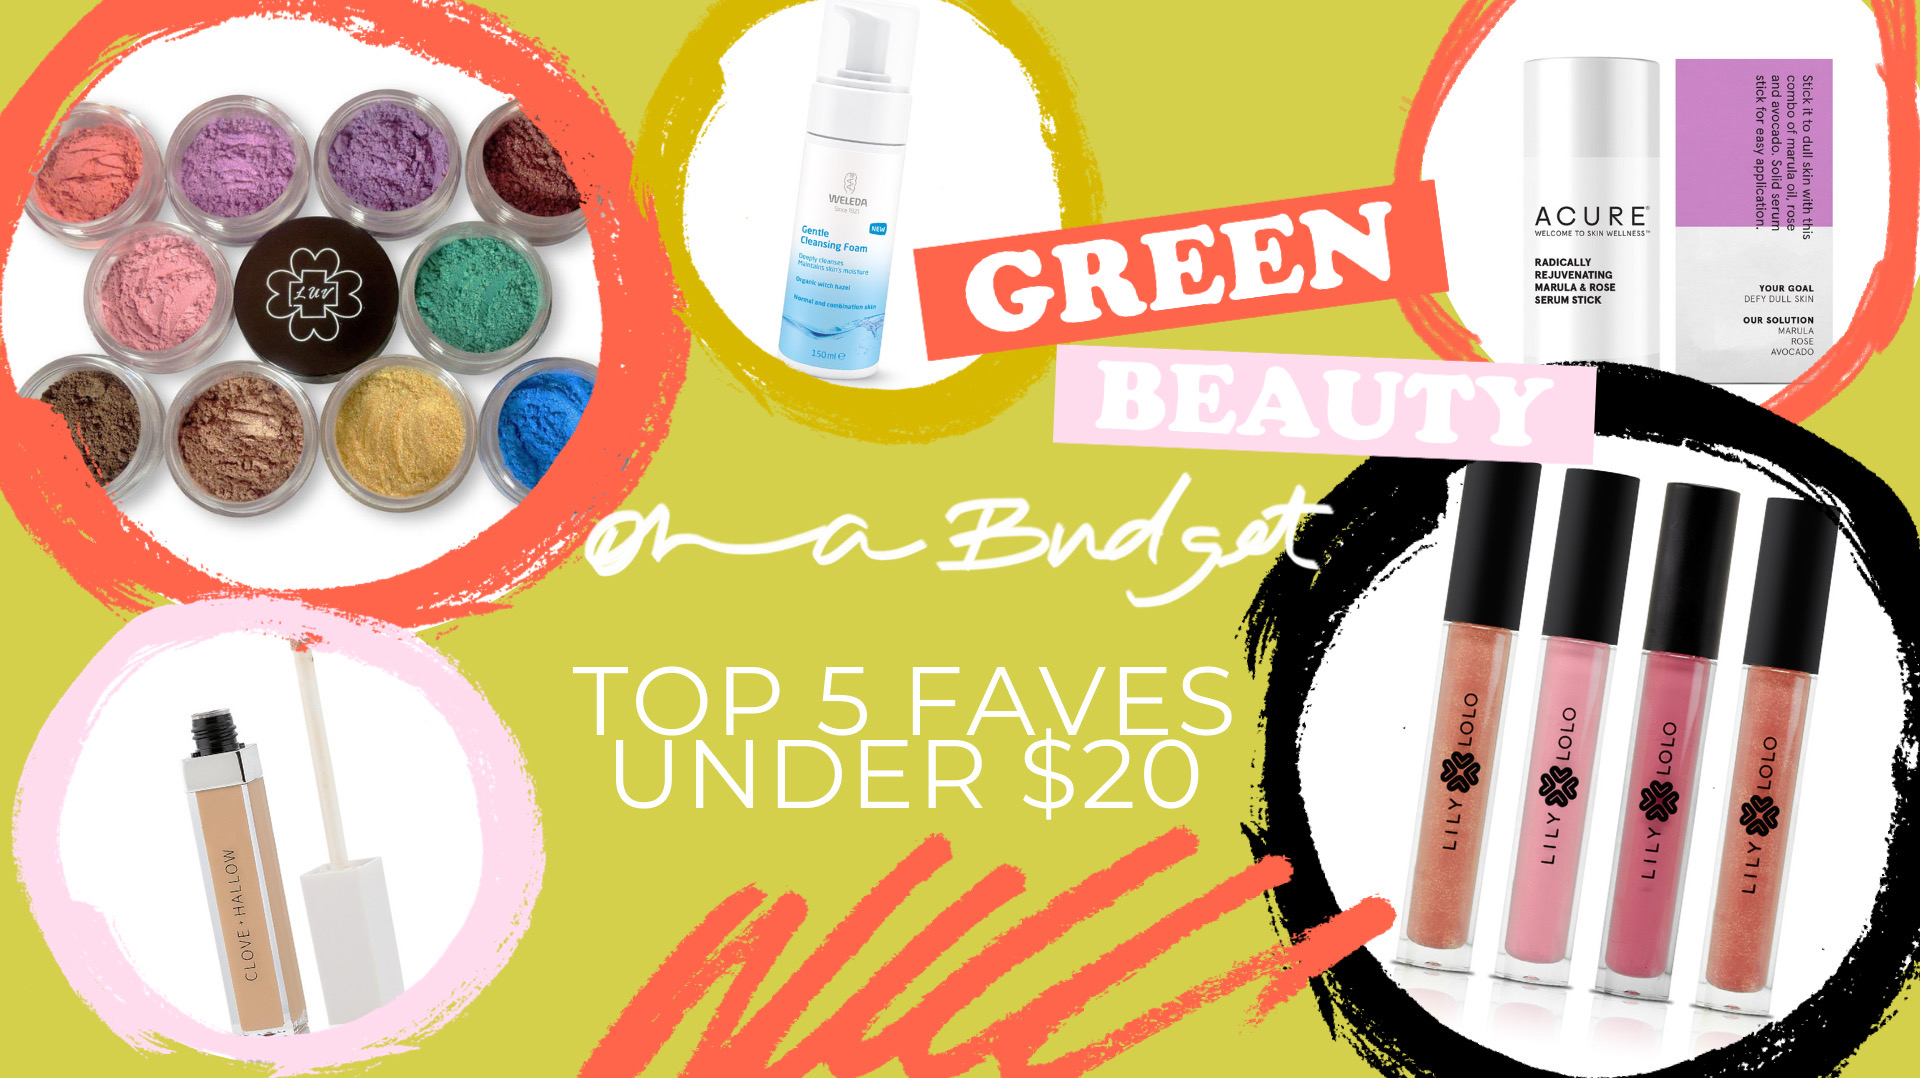 Green Beauty on a Budget, Top 5 Faves Under $20